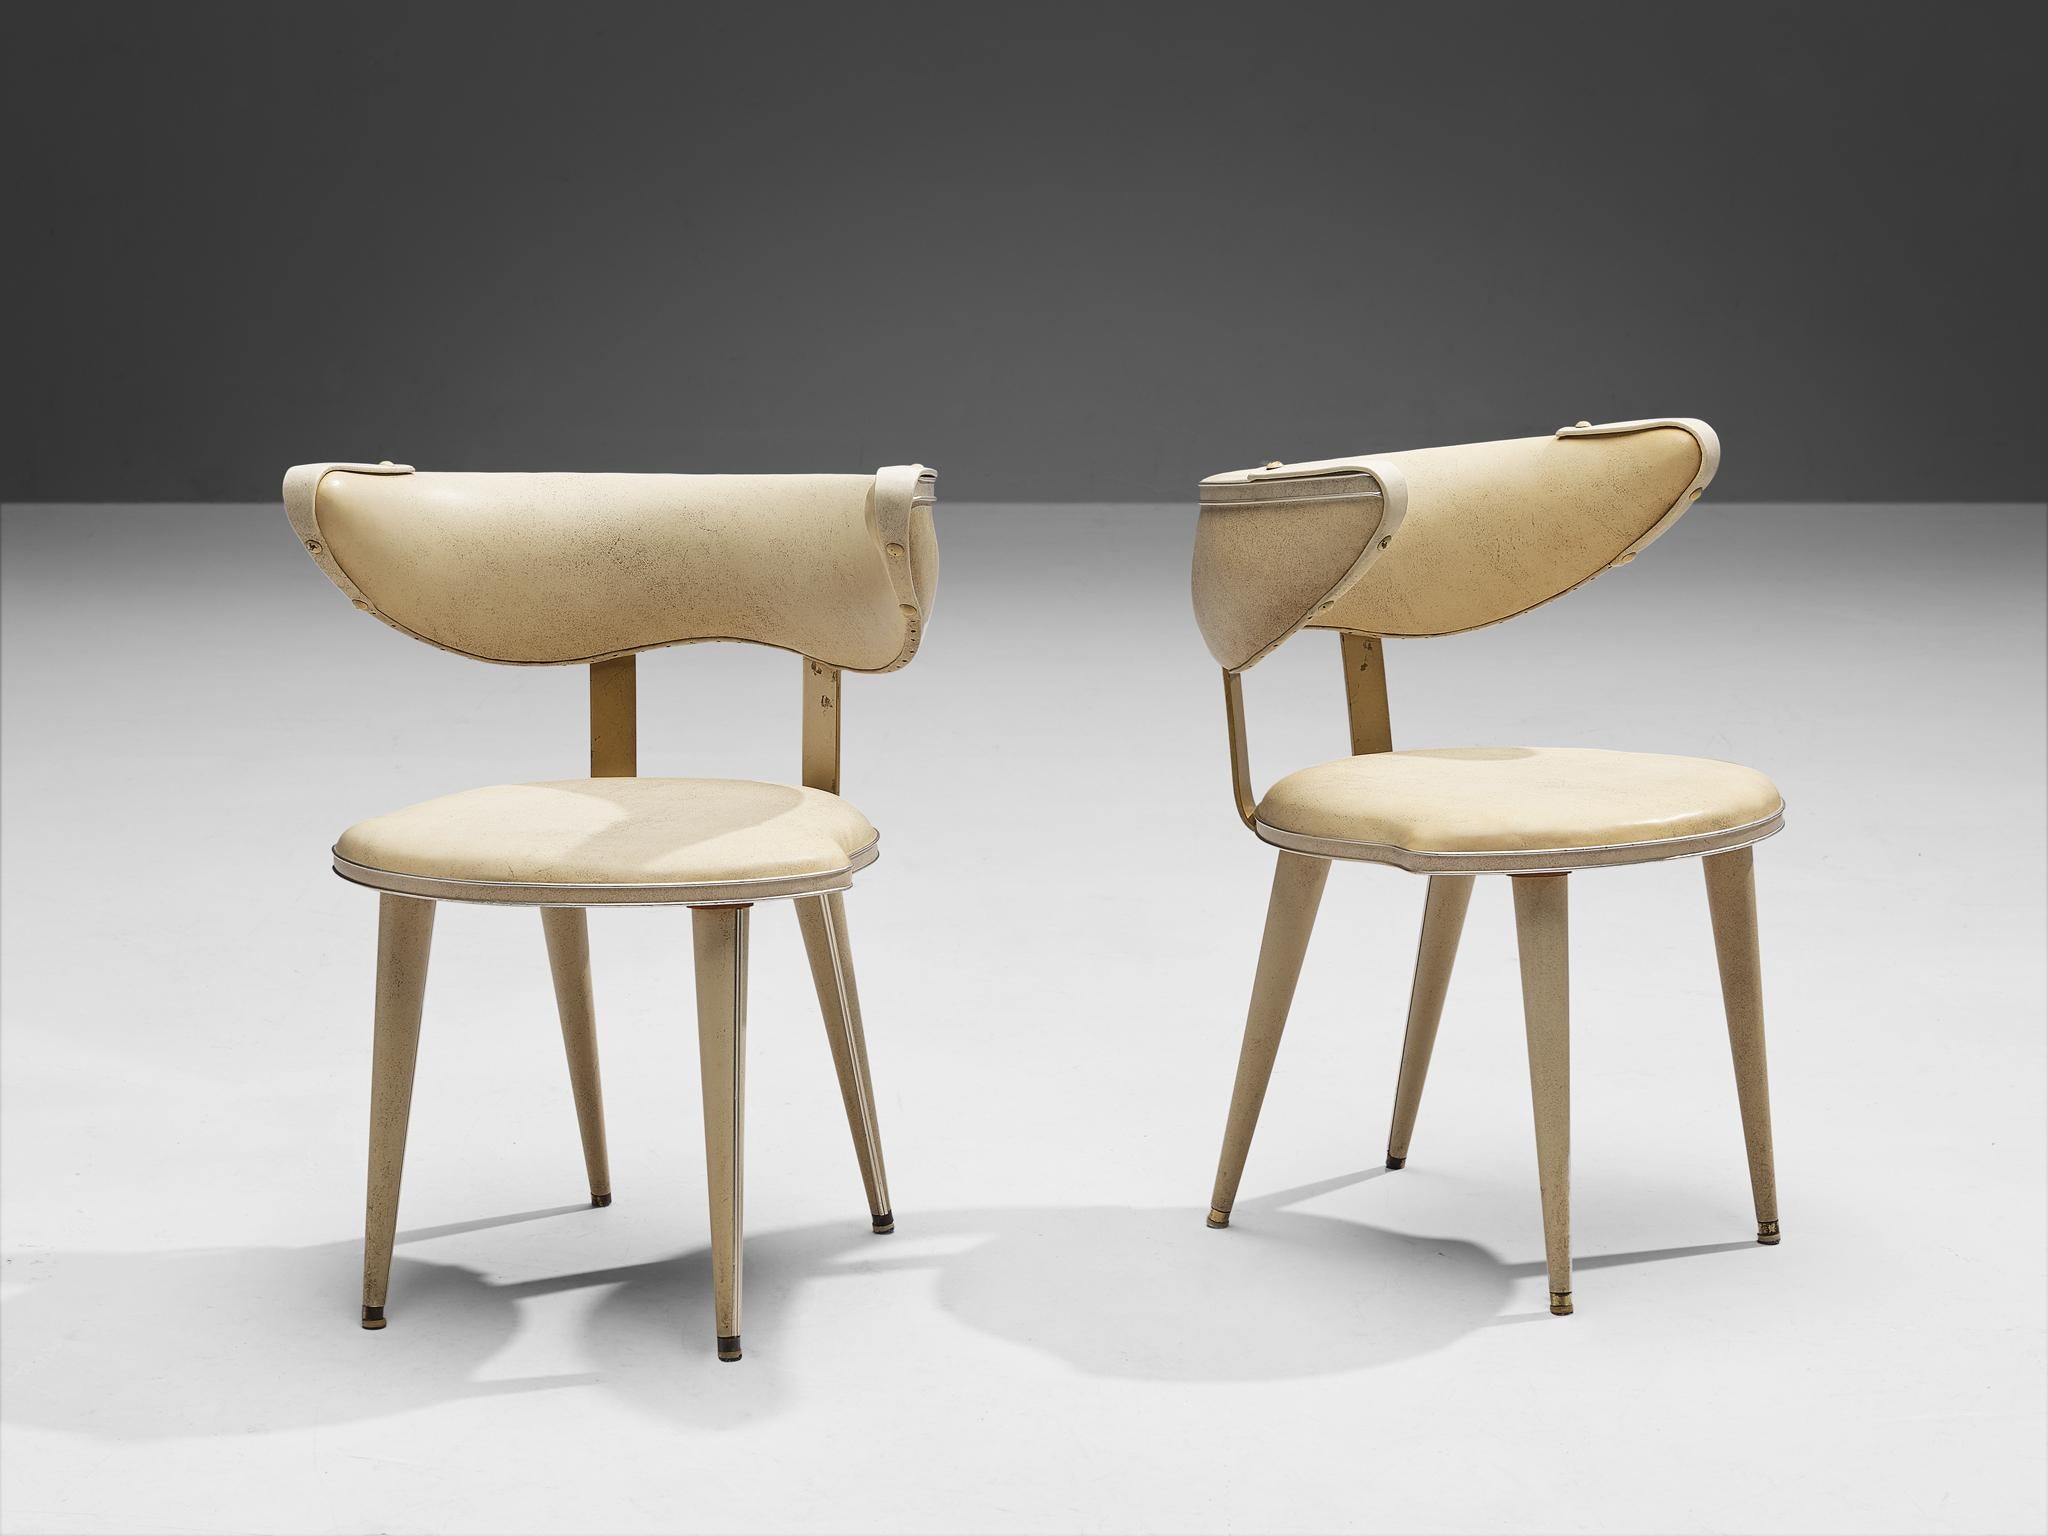 Umberto Mascagni, chairs, vinyl, wood, chrome, brass, Italy, 1950s

Pair of sculptural chairs designed by Umberto Mascagni. The chairs are executed in a very common material of the 1950s, vinyl. The chairs are neat and refined in design. The